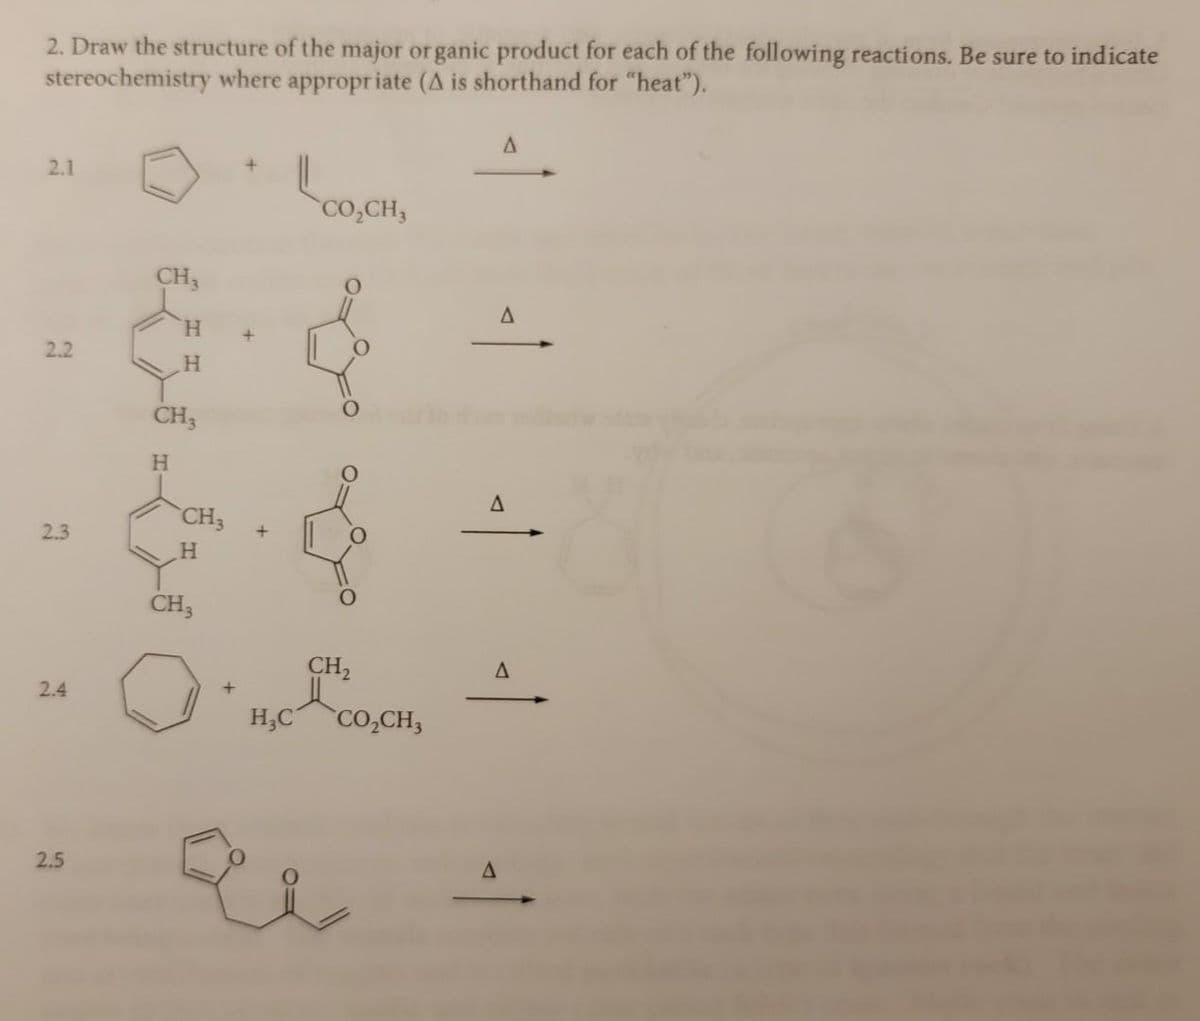 2. Draw the structure of the major organic product for each of the following reactions. Be sure to indicate
stereochemistry where appropriate (A is shorthand for "heat").
2.1
2.2
2.3
2.4
2.5
CH3
H
CH3
H
CH3
H
CH3
+
+
+
CO,CH,
CH₂
H₂C CO₂CH3
u
A
A